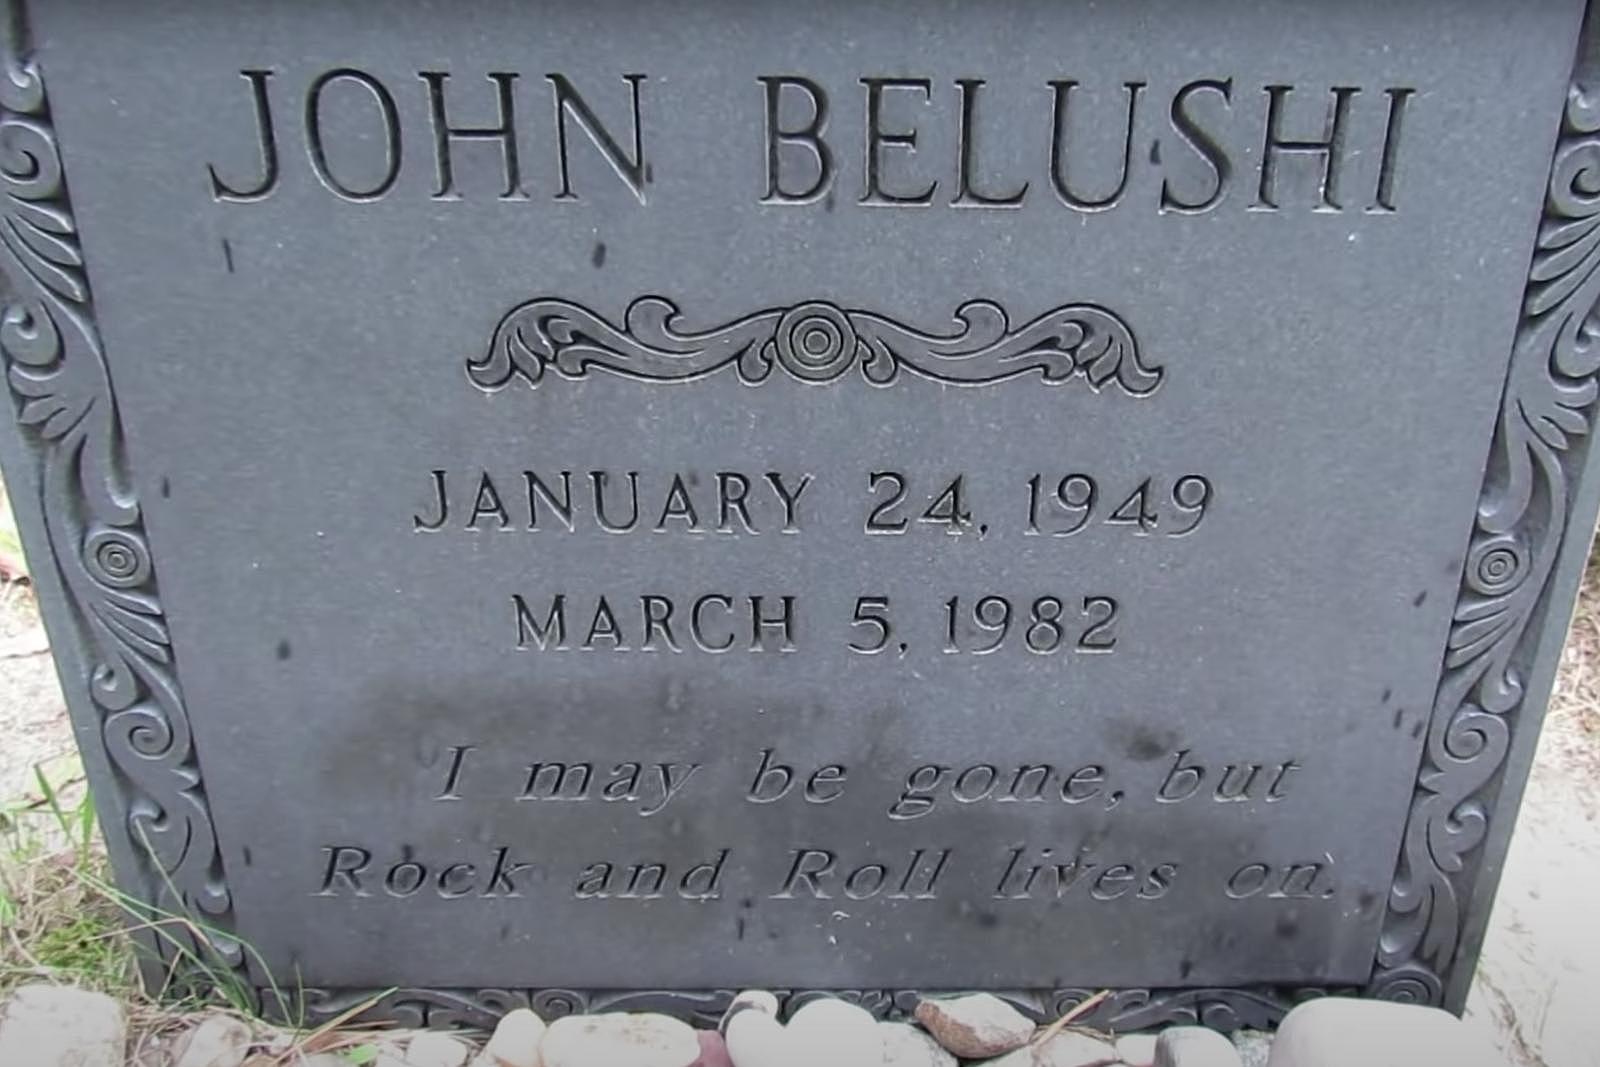 John Belushi's Grave with "I may be gone but rock and roll lives on" quote